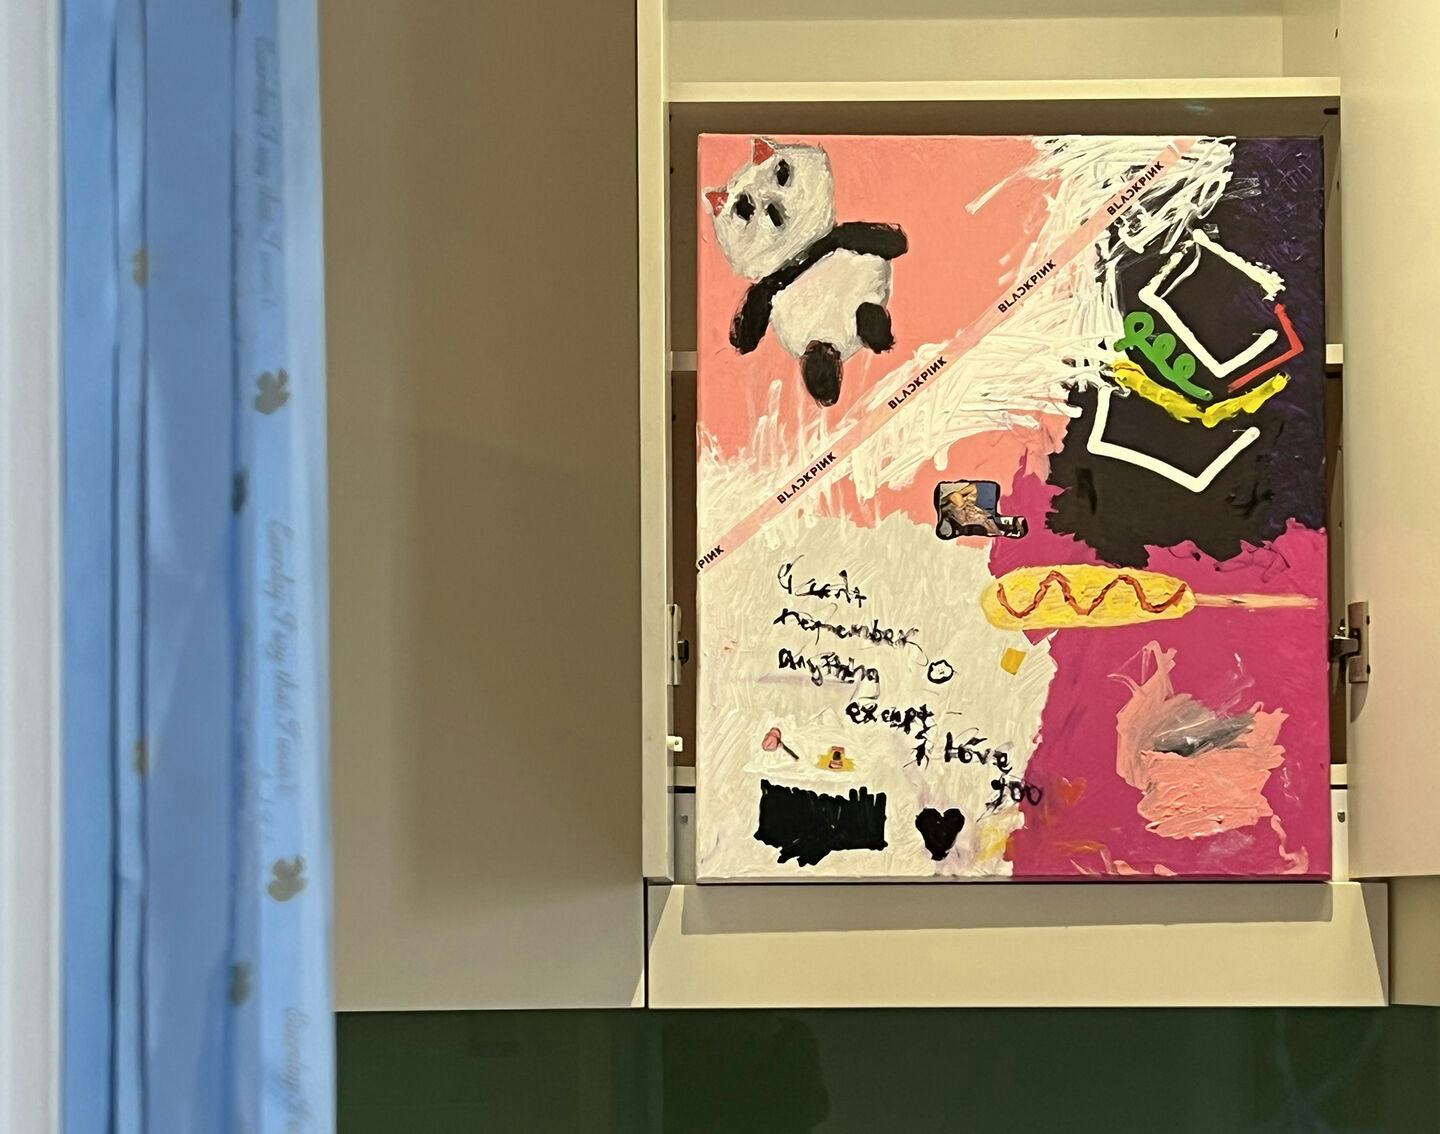 A painting by Jemi Gale with a panda in one baby pink corner opposite a hot pink corner. The text on the painting reads: 'I don't remember anything except i love yoo'. The painting is next to blue satin ribbons by Jackie de Lacy that read in cursive, ‘Everyday, I don’t’. 